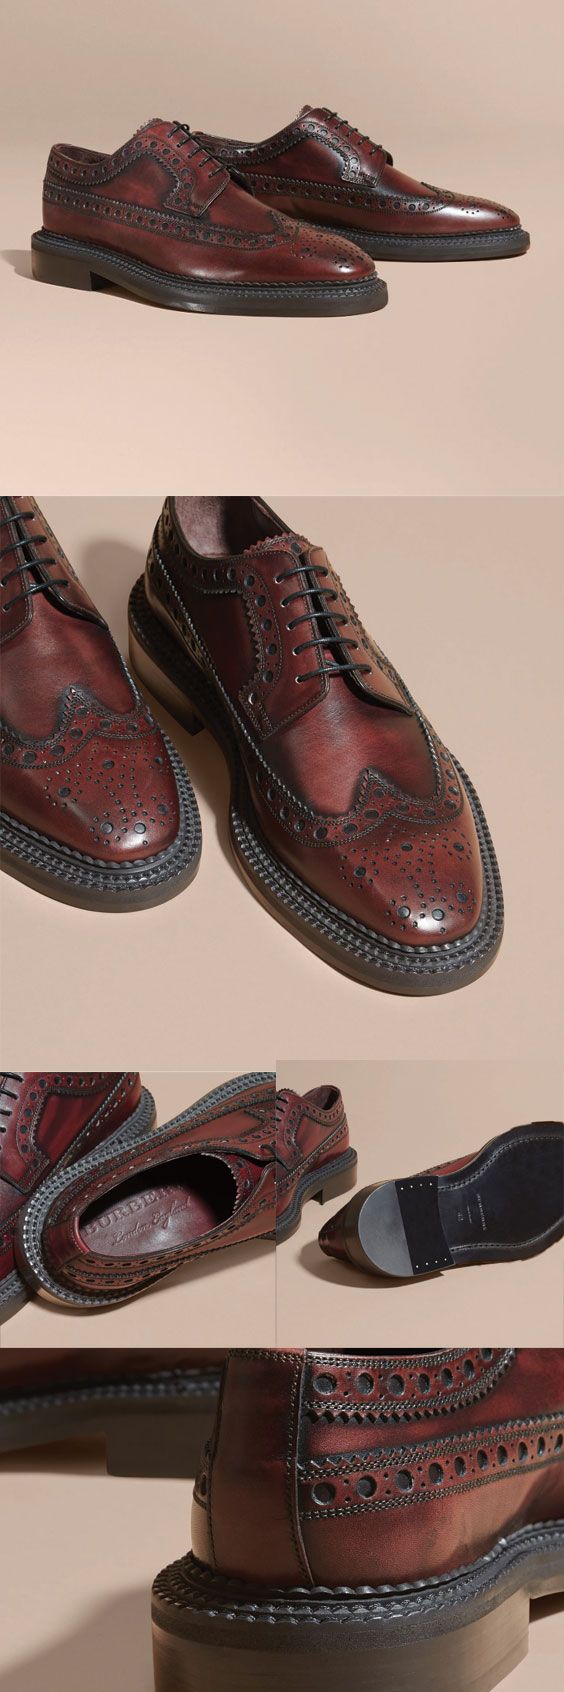 Burberry Leather Derby Brogues $750...